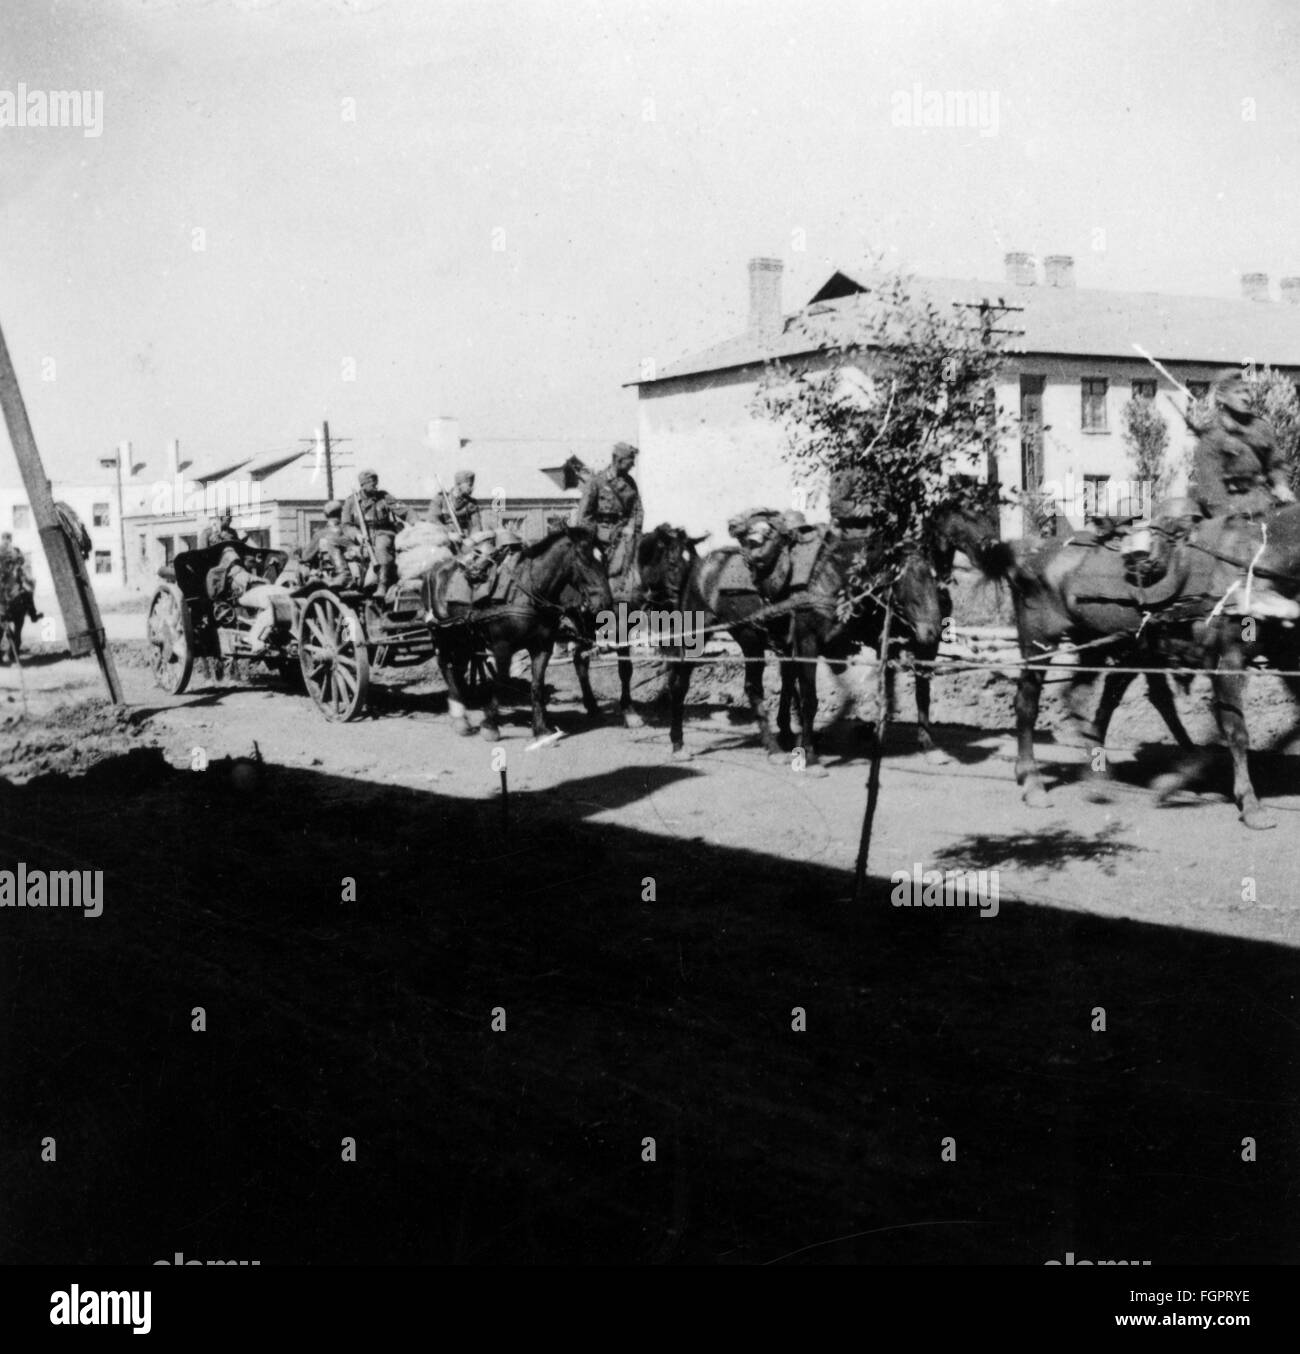 Second World War / WWII, German Wehrmacht, horse-drawn artillery on of the march in Poland or in the Ukraine, summer 1941, light field howitzer lFH 18, Additional-Rights-Clearences-Not Available Stock Photo